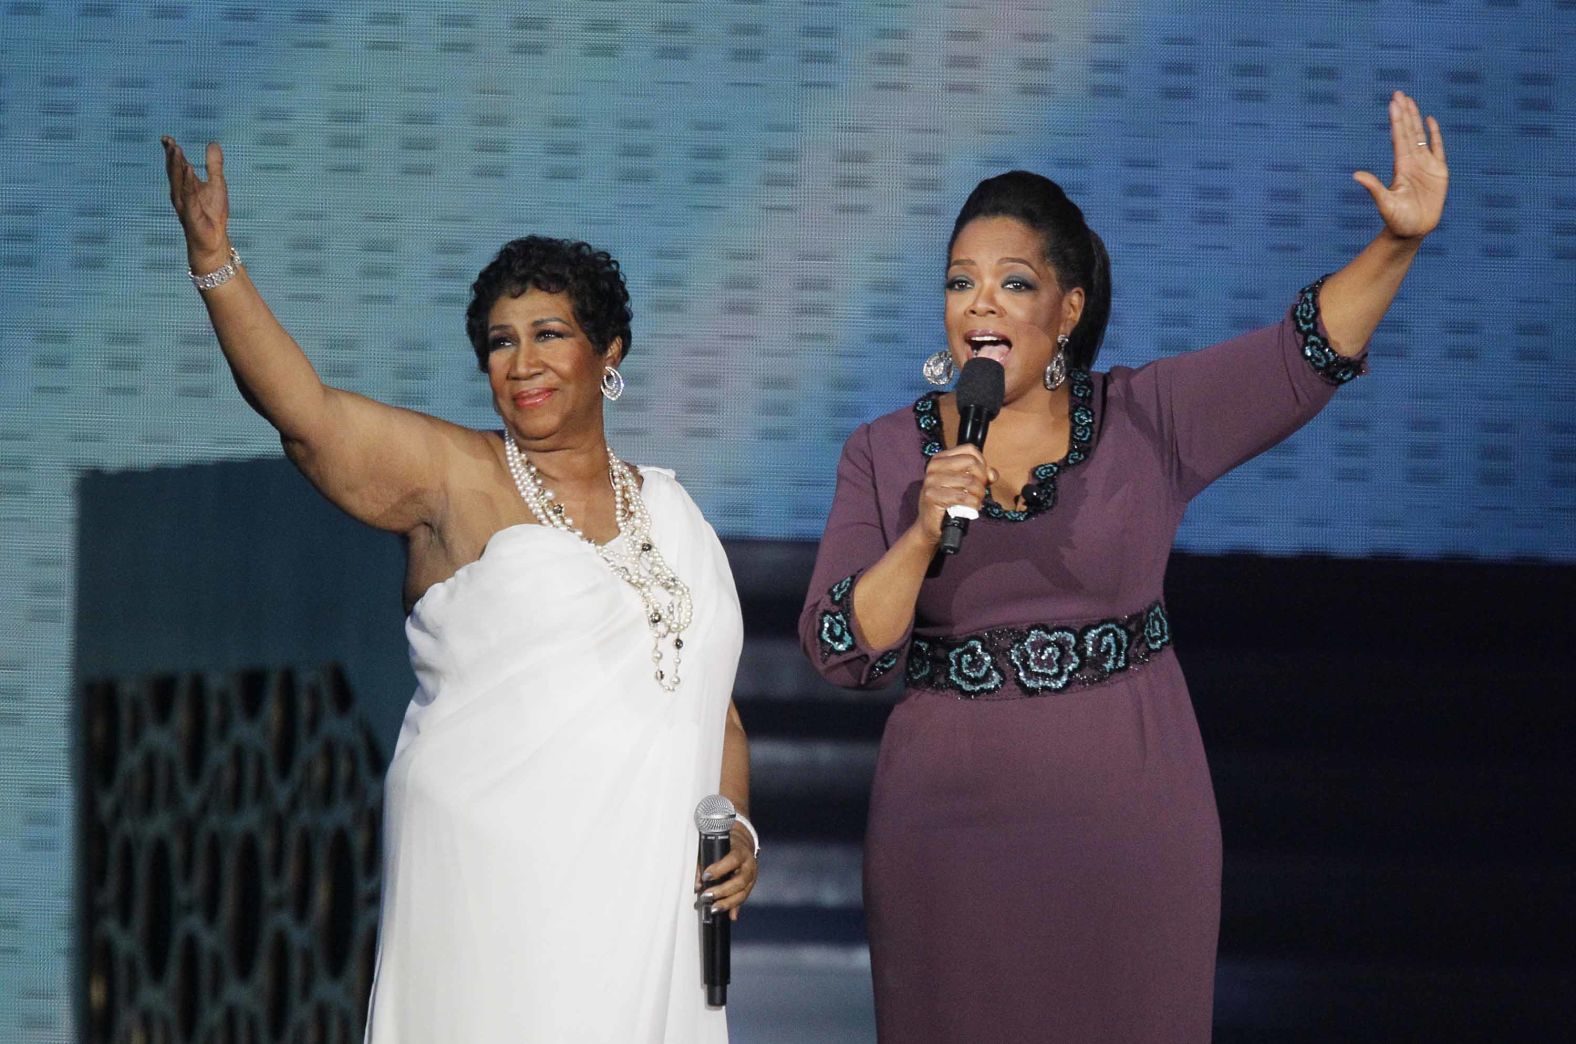 Franklin and Oprah Winfrey during a star-studded taping of "Surprise Oprah! A Farewell Spectacular," in Chicago in 2011.